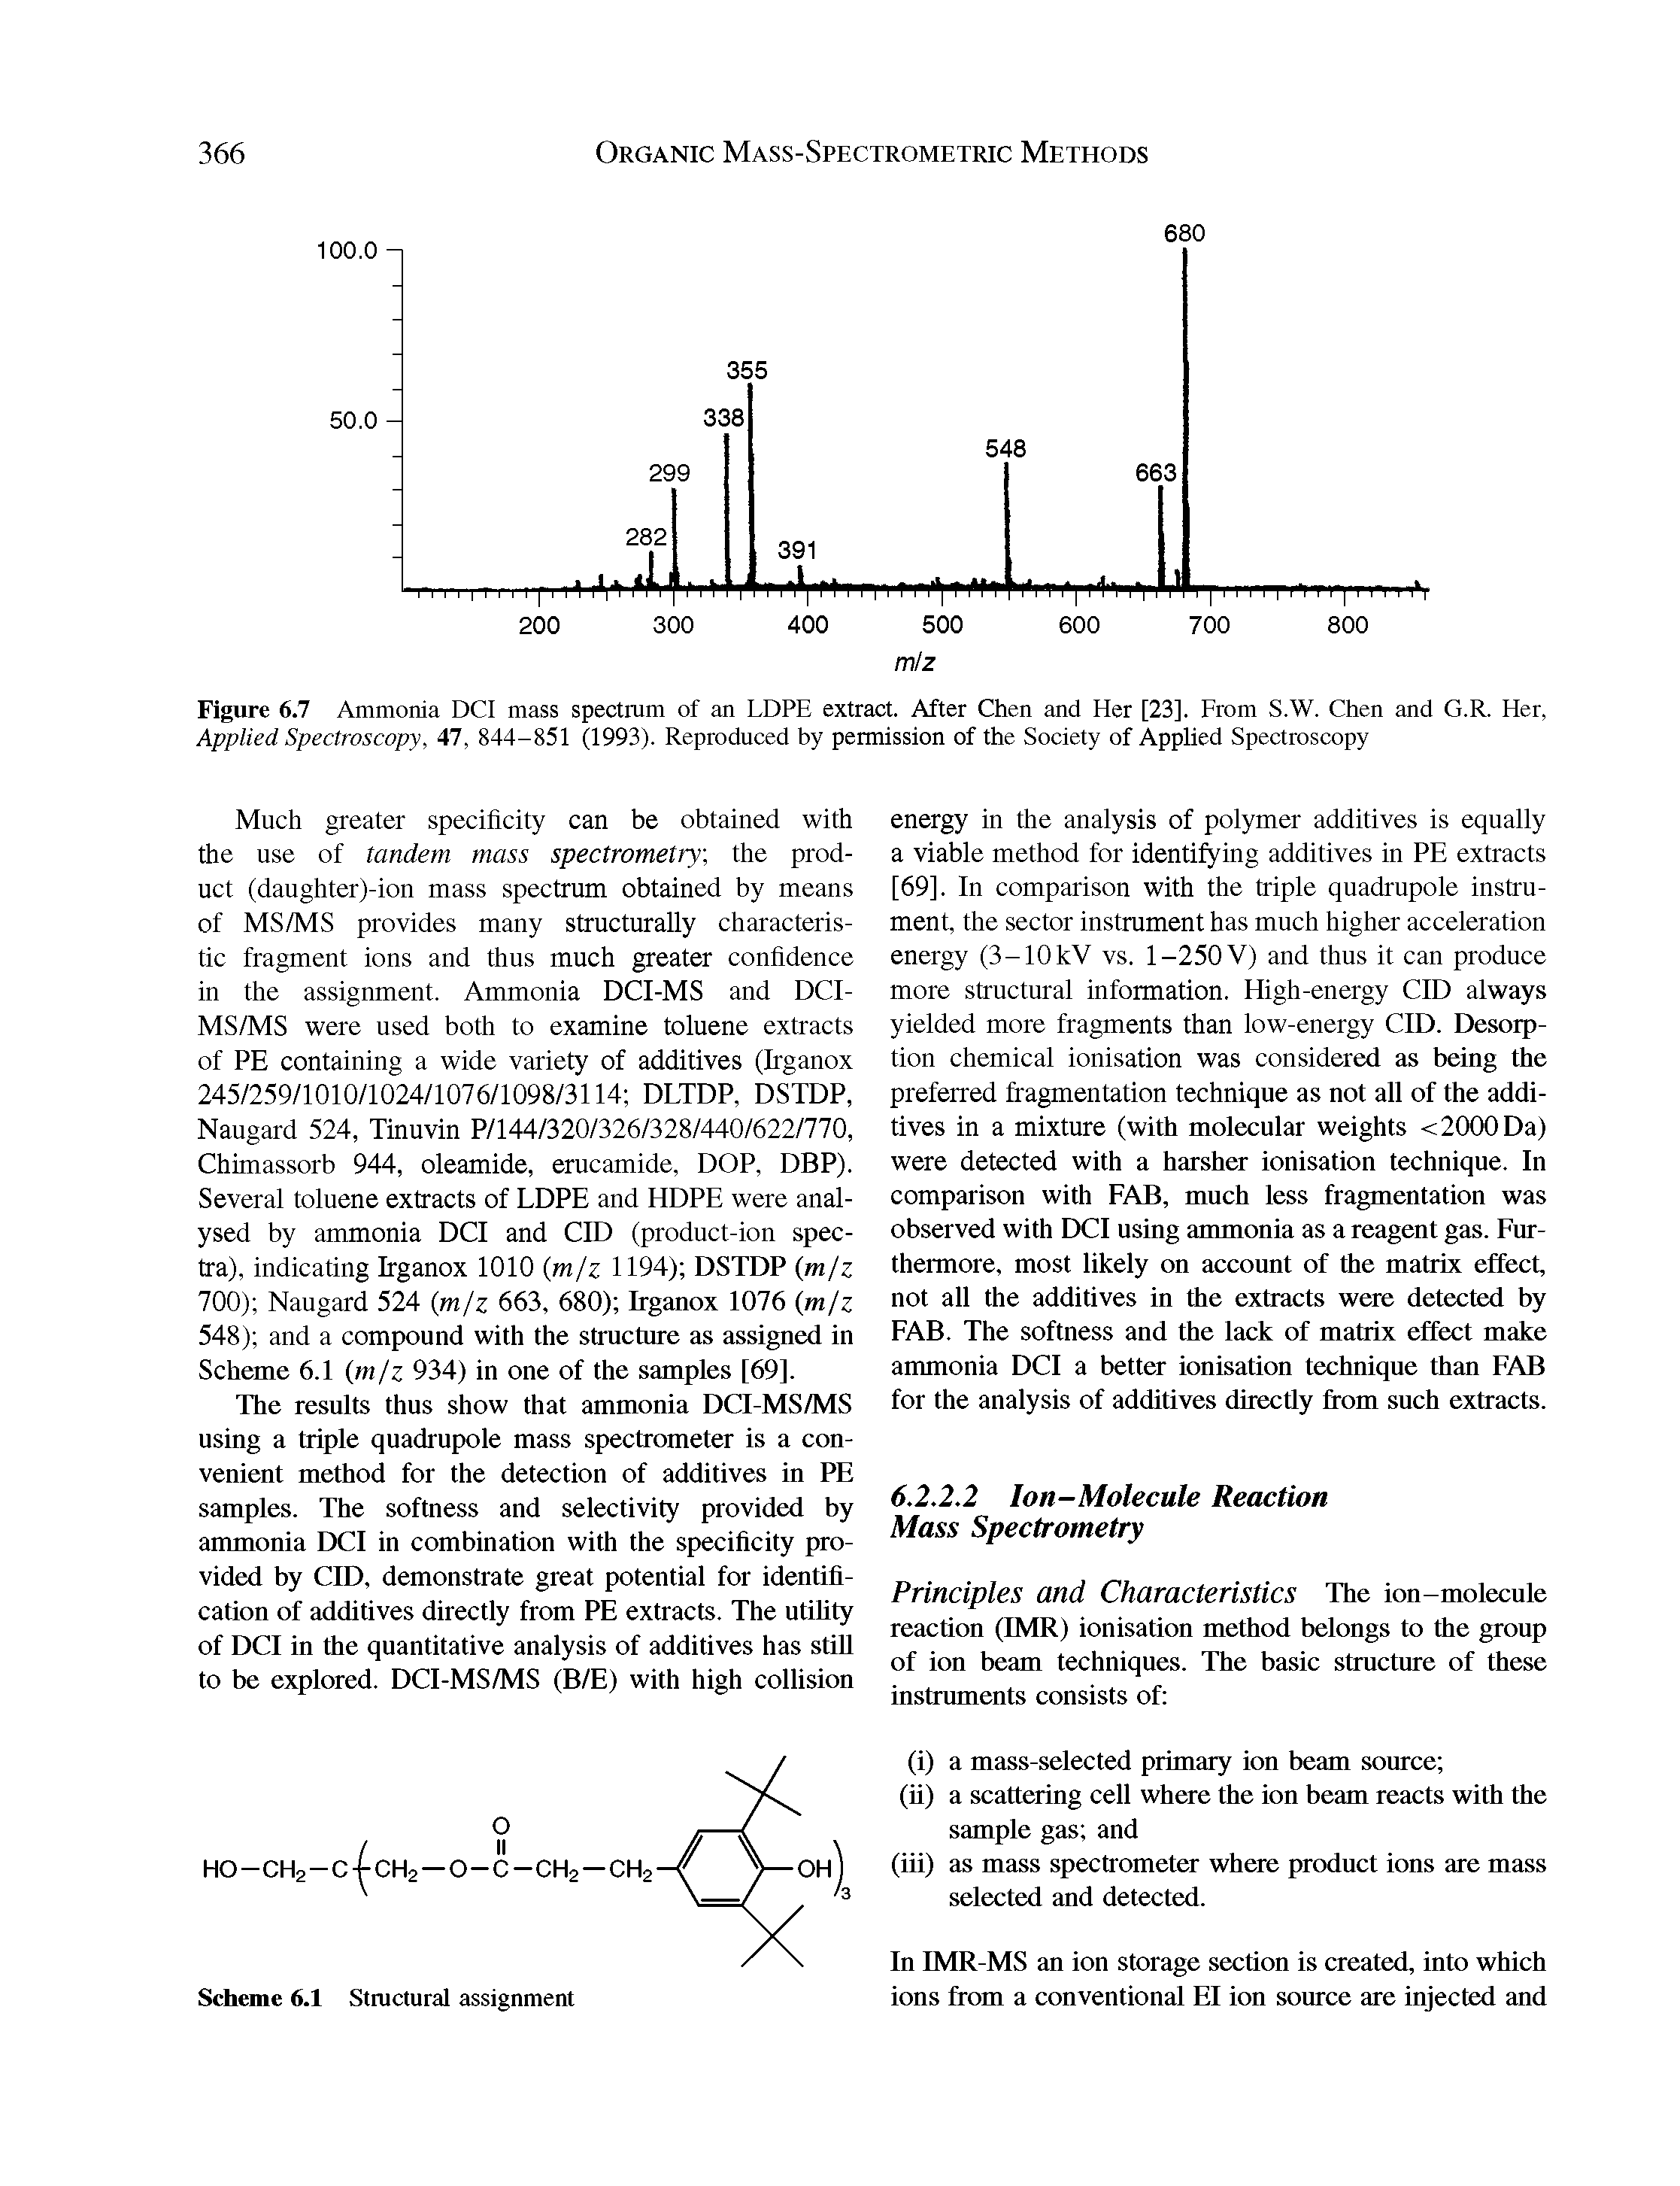 Figure 6.7 Ammonia DCI mass spectrum of an LDPE extract. After Chen and Her [23]. From S.W. Chen and G.R. Her, Applied Spectroscopy, 47, 844-851 (1993). Reproduced by permission of the Society of Applied Spectroscopy...